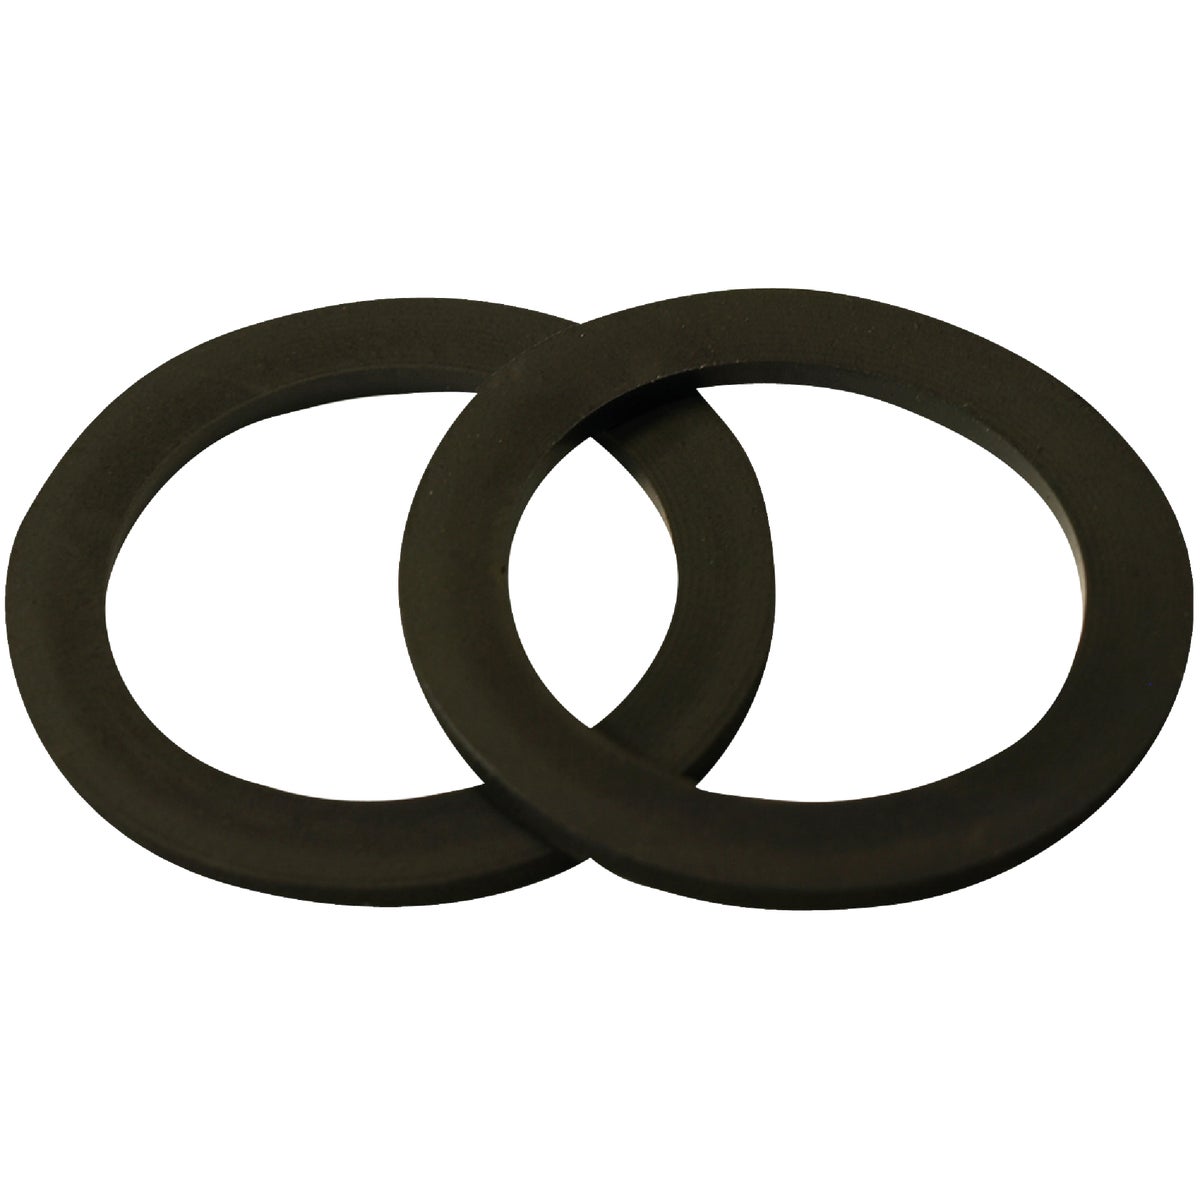 Item 707503, Replacement poly rubber coupler gaskets. EPDM rubber construction.